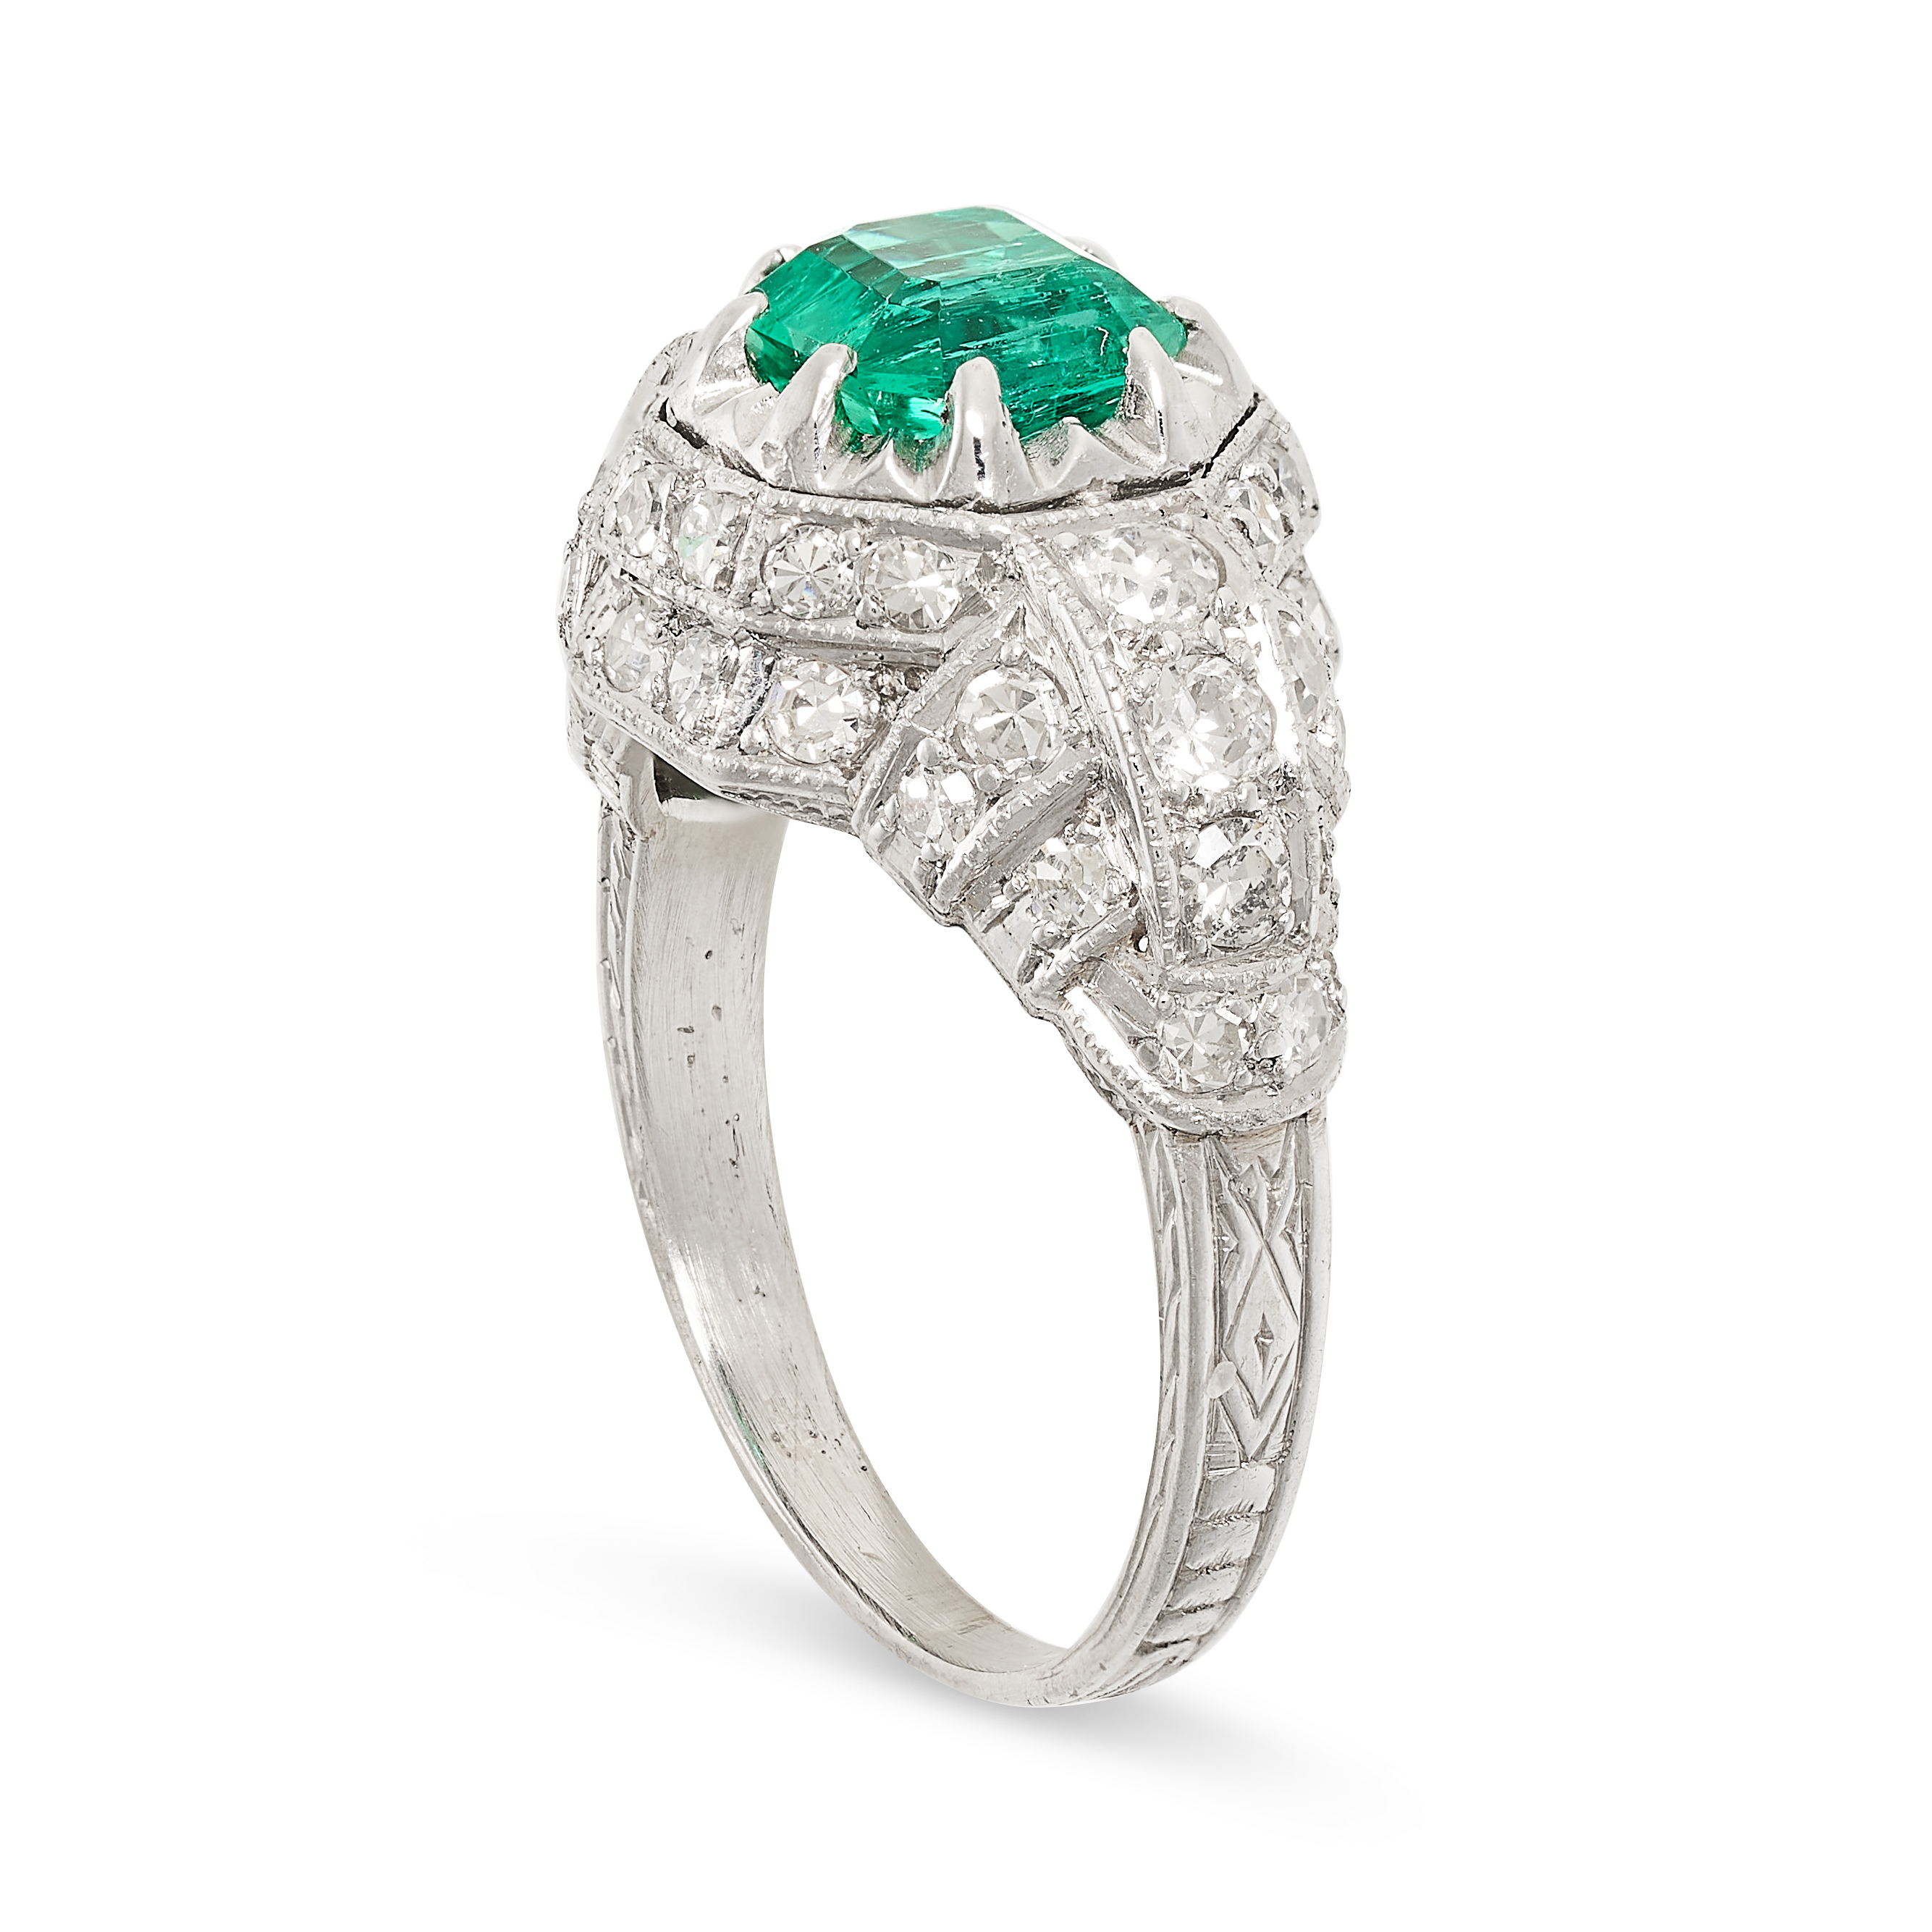 A COLOMBIAN EMERALD AND DIAMOND RING set with an emerald cut emerald of 1.22 carats within geometric - Image 2 of 2